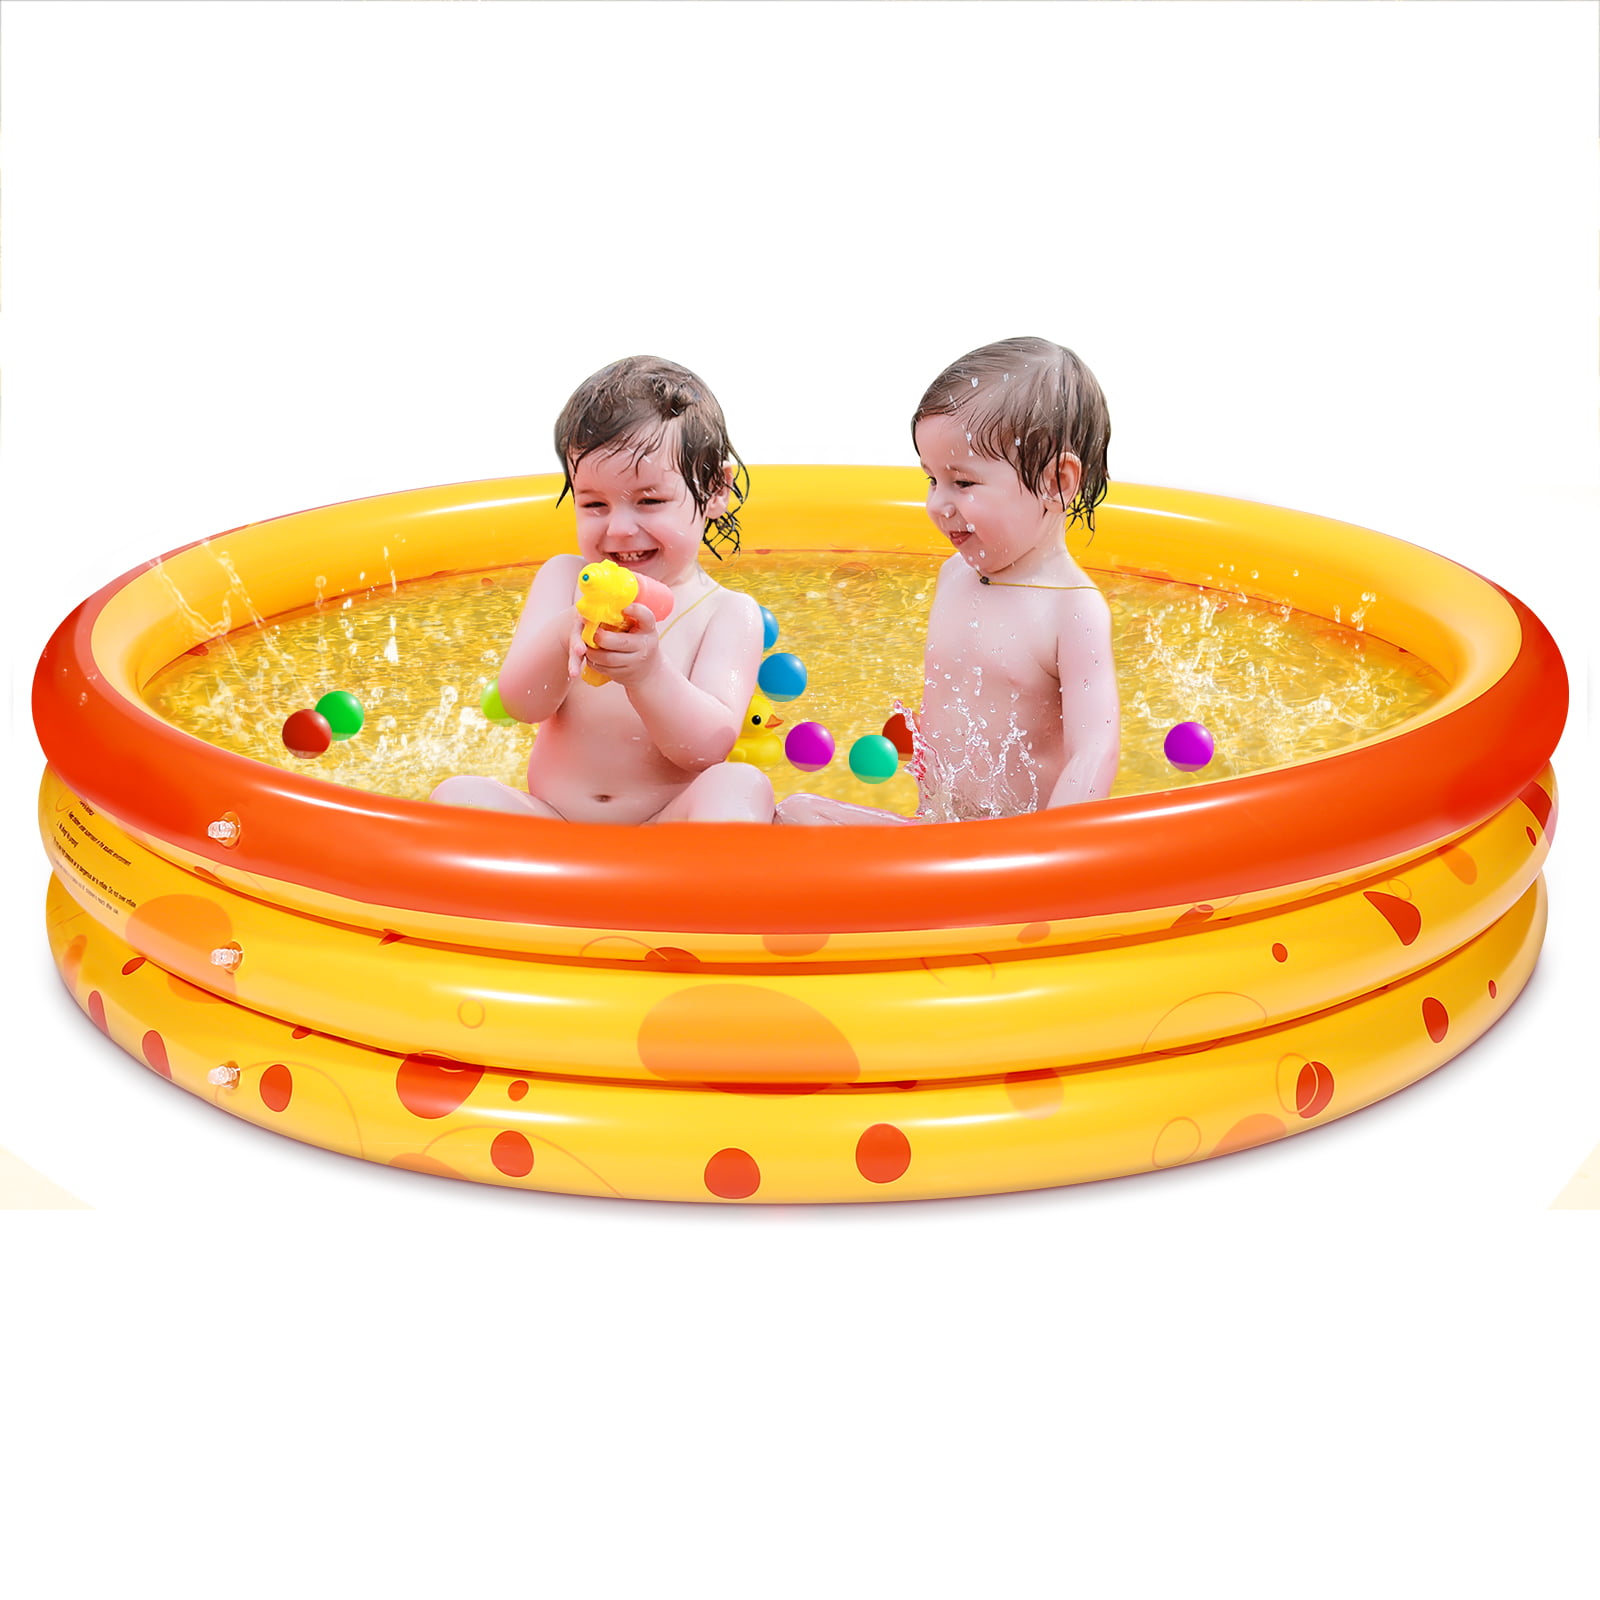 108L Chad Valley 3ft 3 Ring Round Kids Paddling Pool 